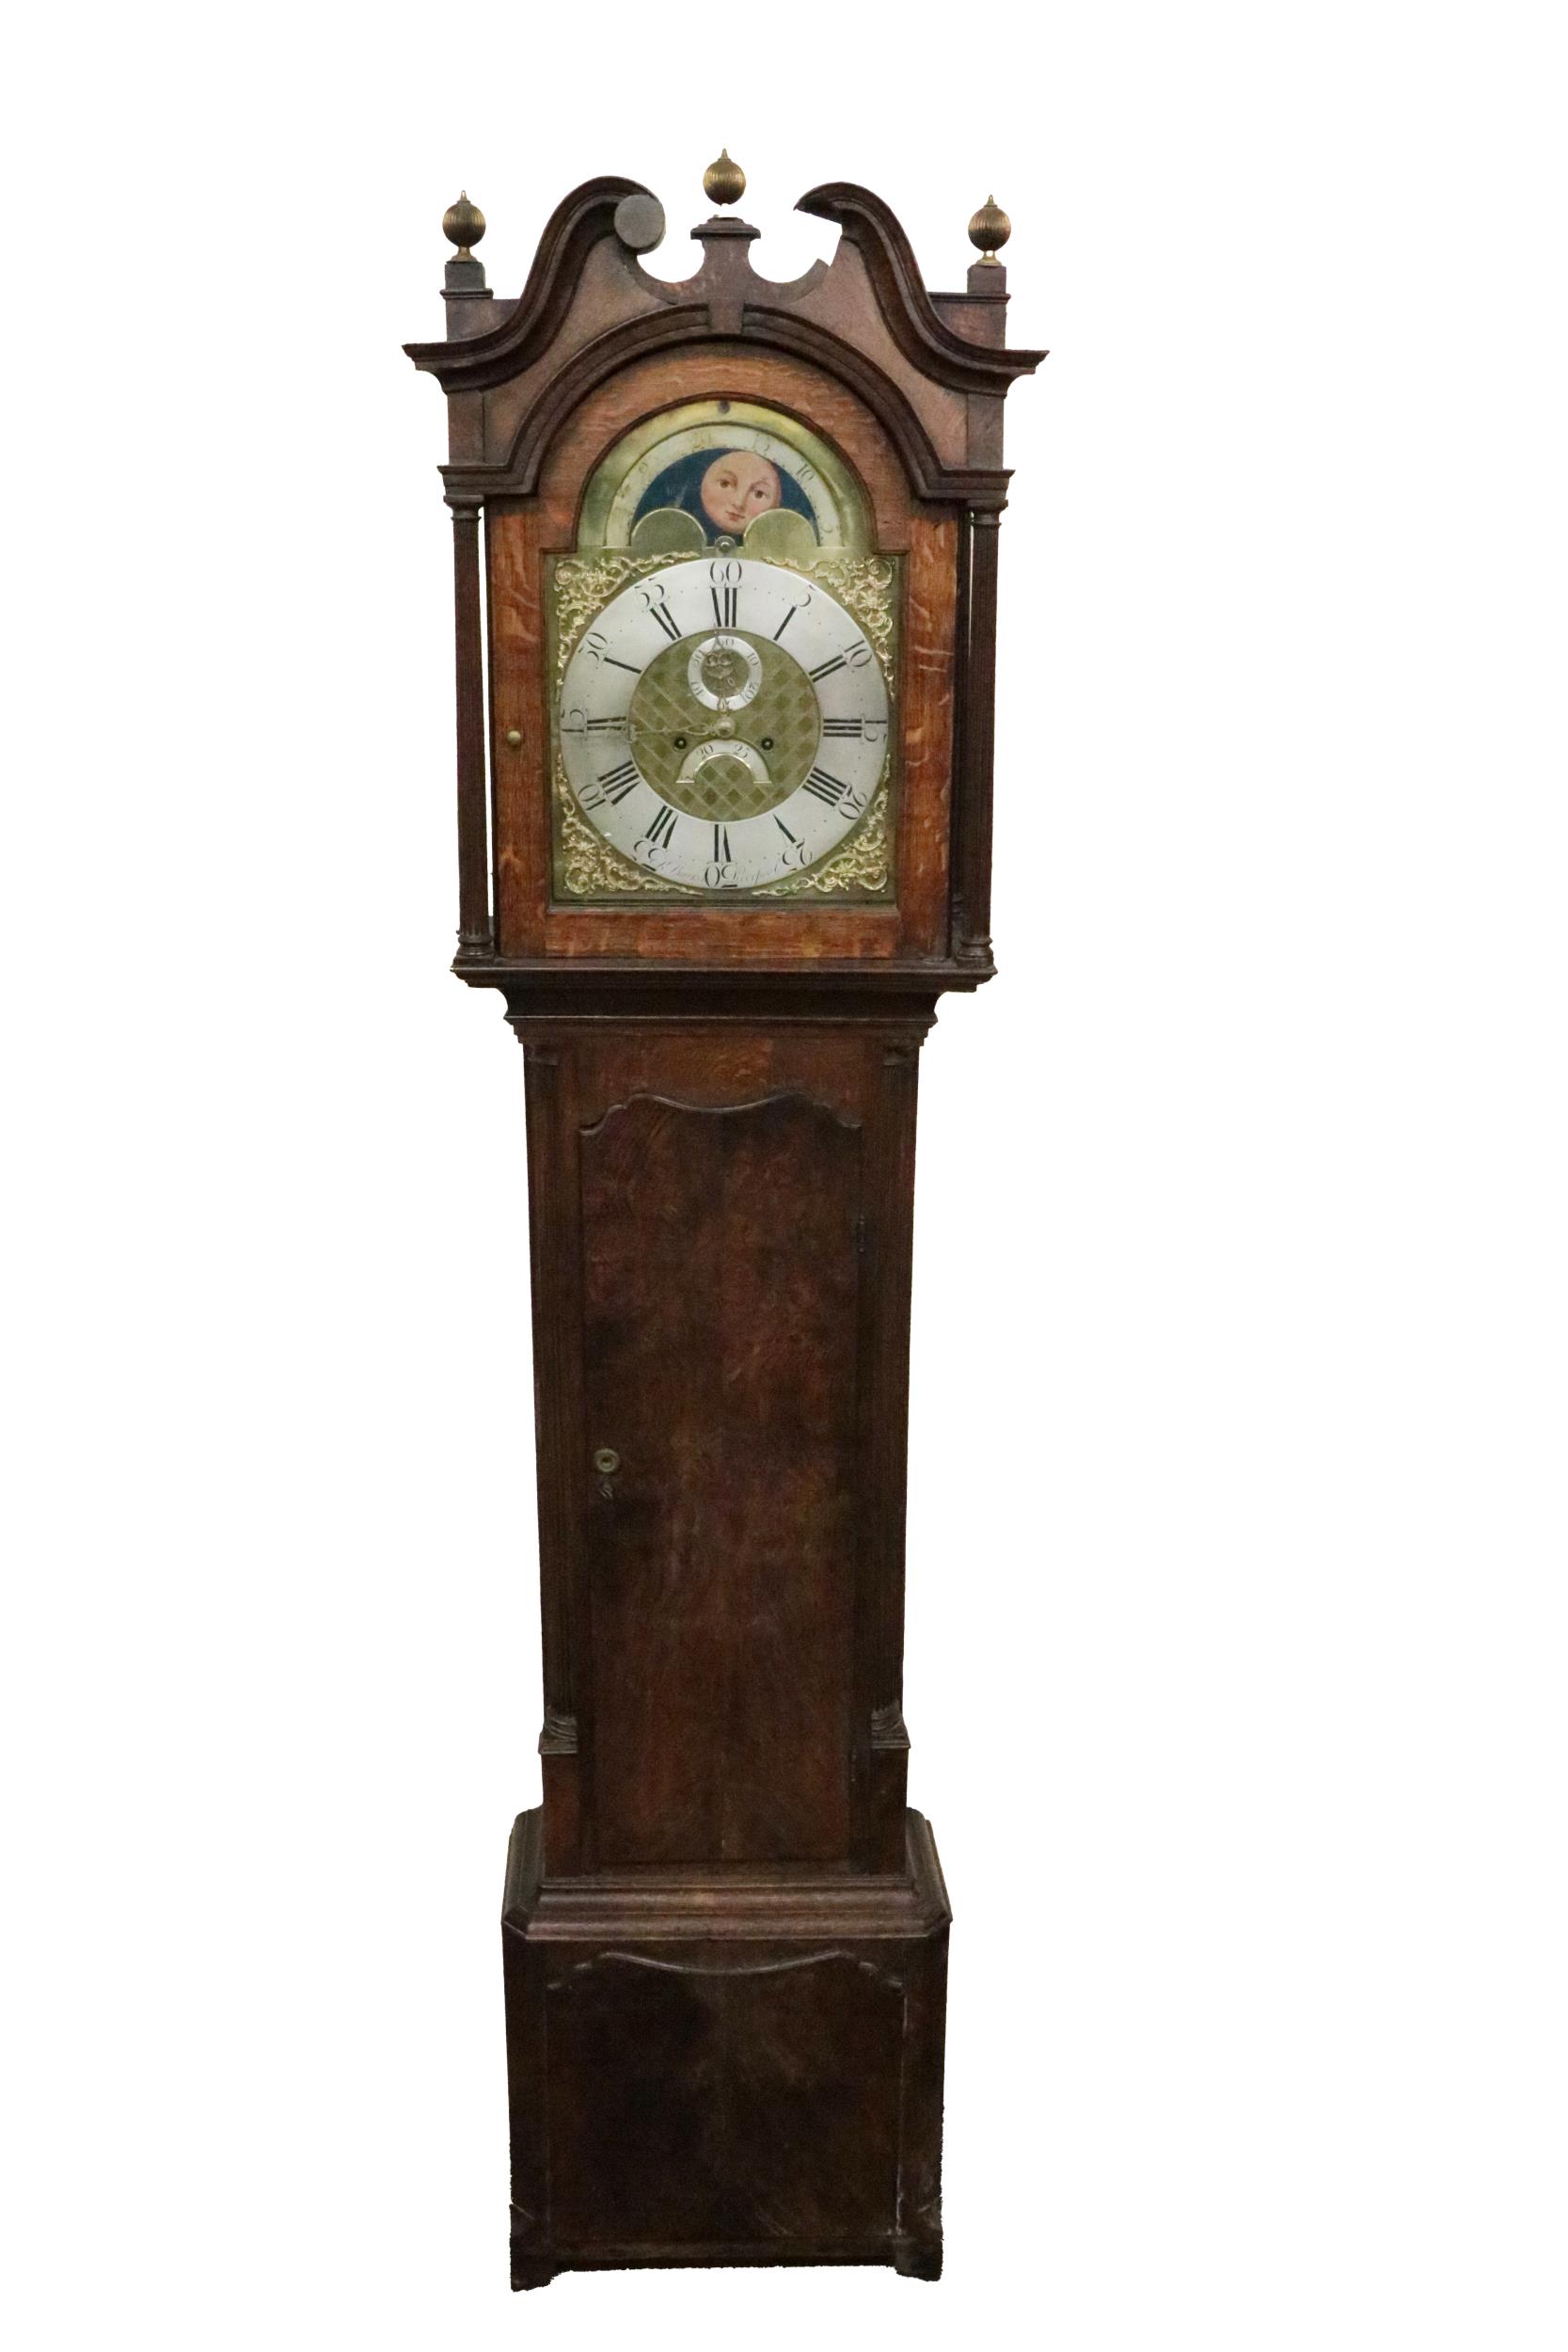 A 19th Century English oak cased Grandfather Clock, the swan neck pediment with brass finials over